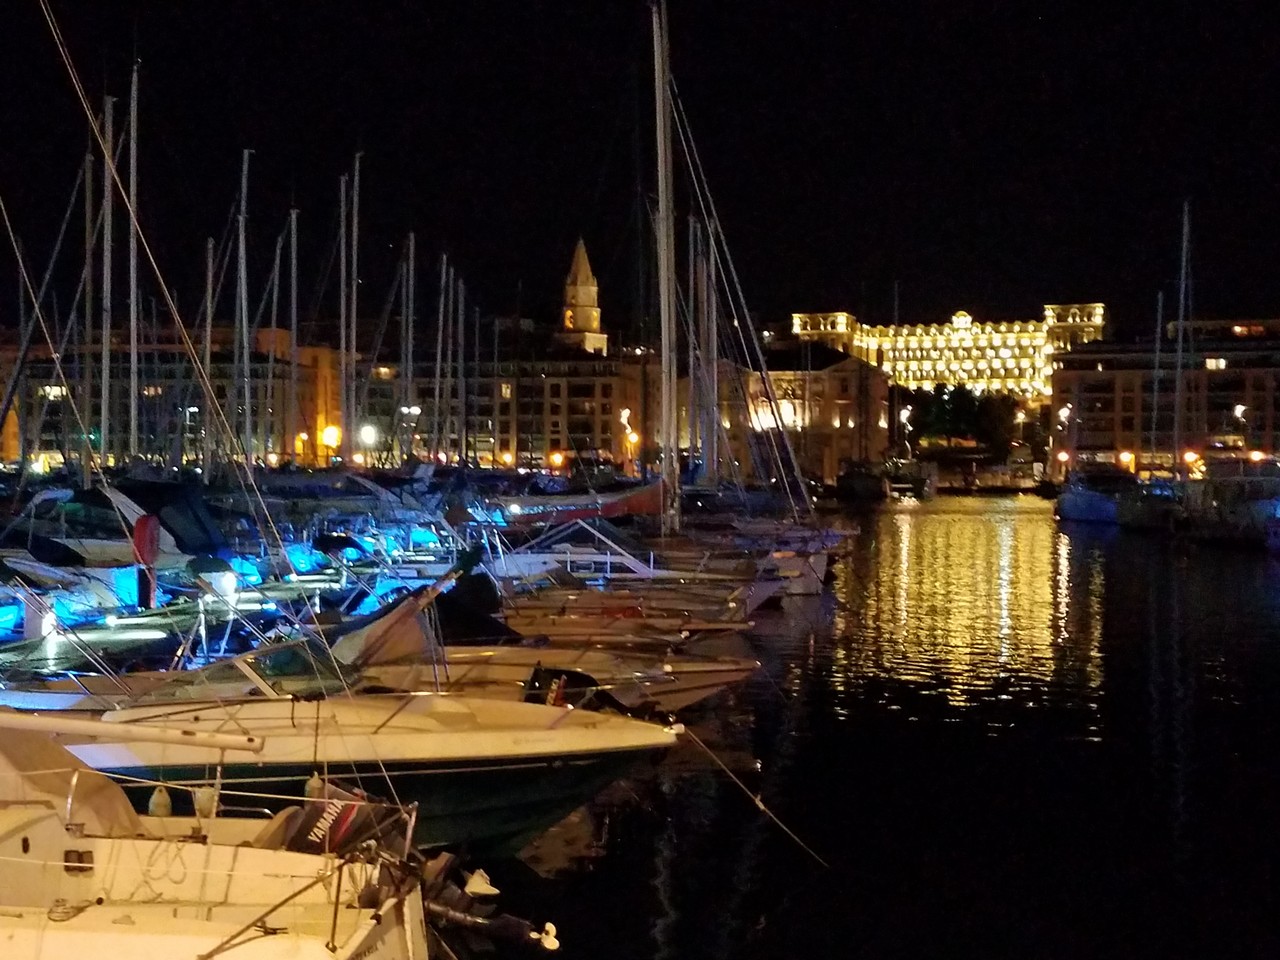 a group of boats in a harbor at night